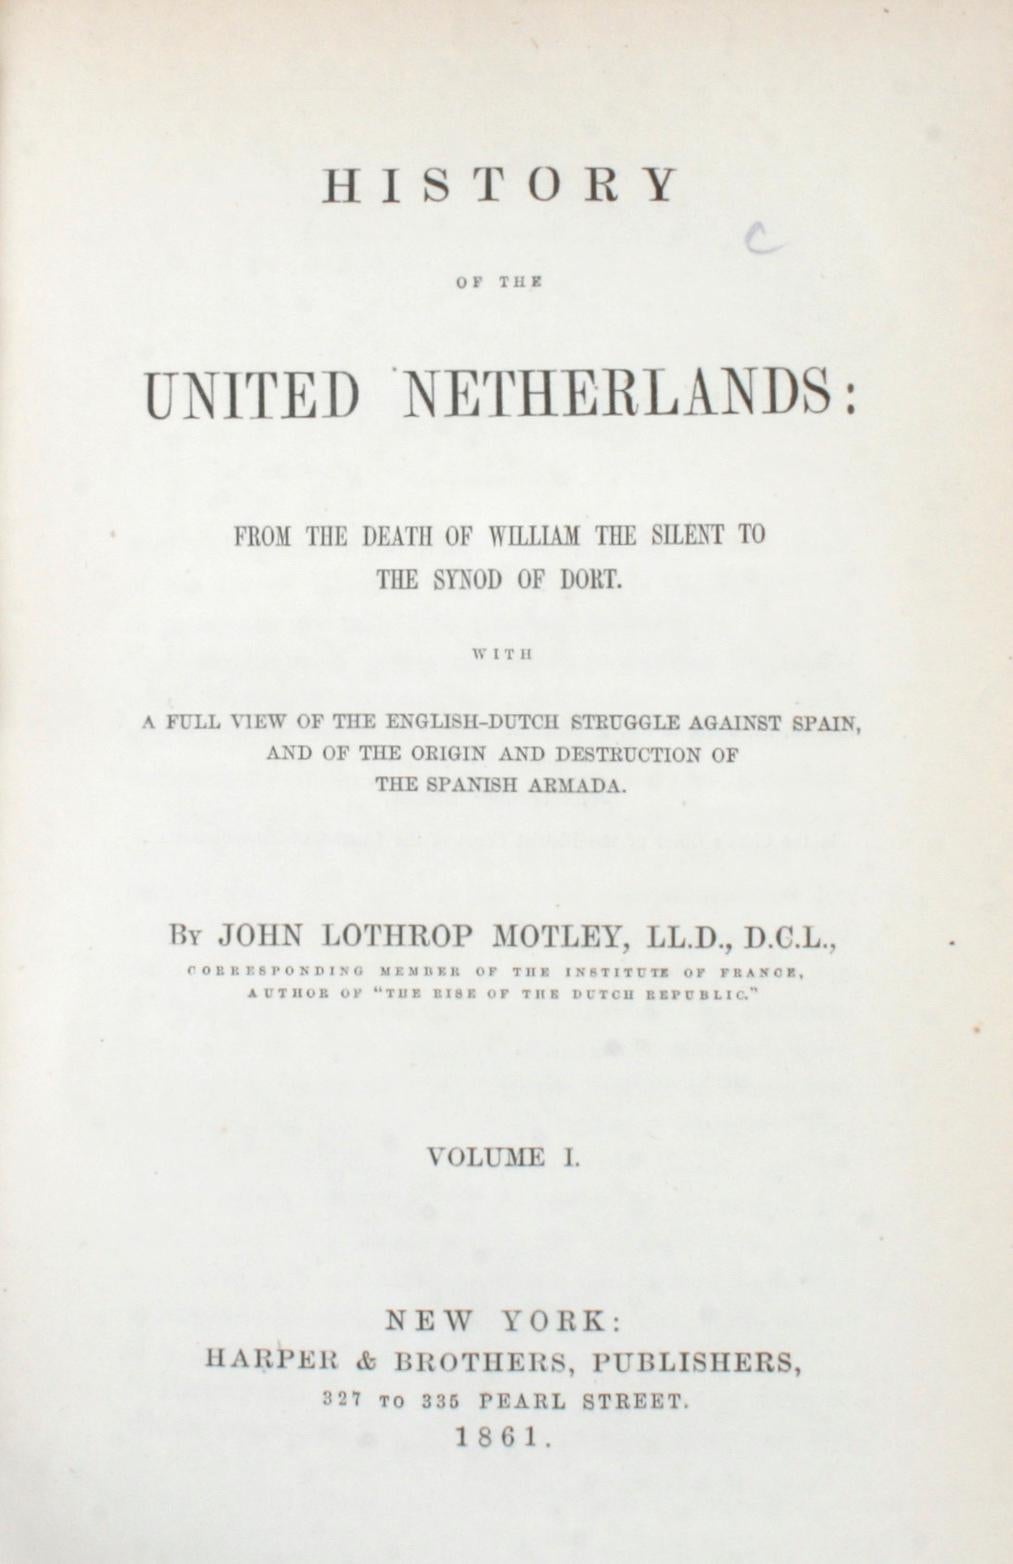 American 7 Volume Leather Bound Set, Dutch Republic and United Netherlands, First Edition